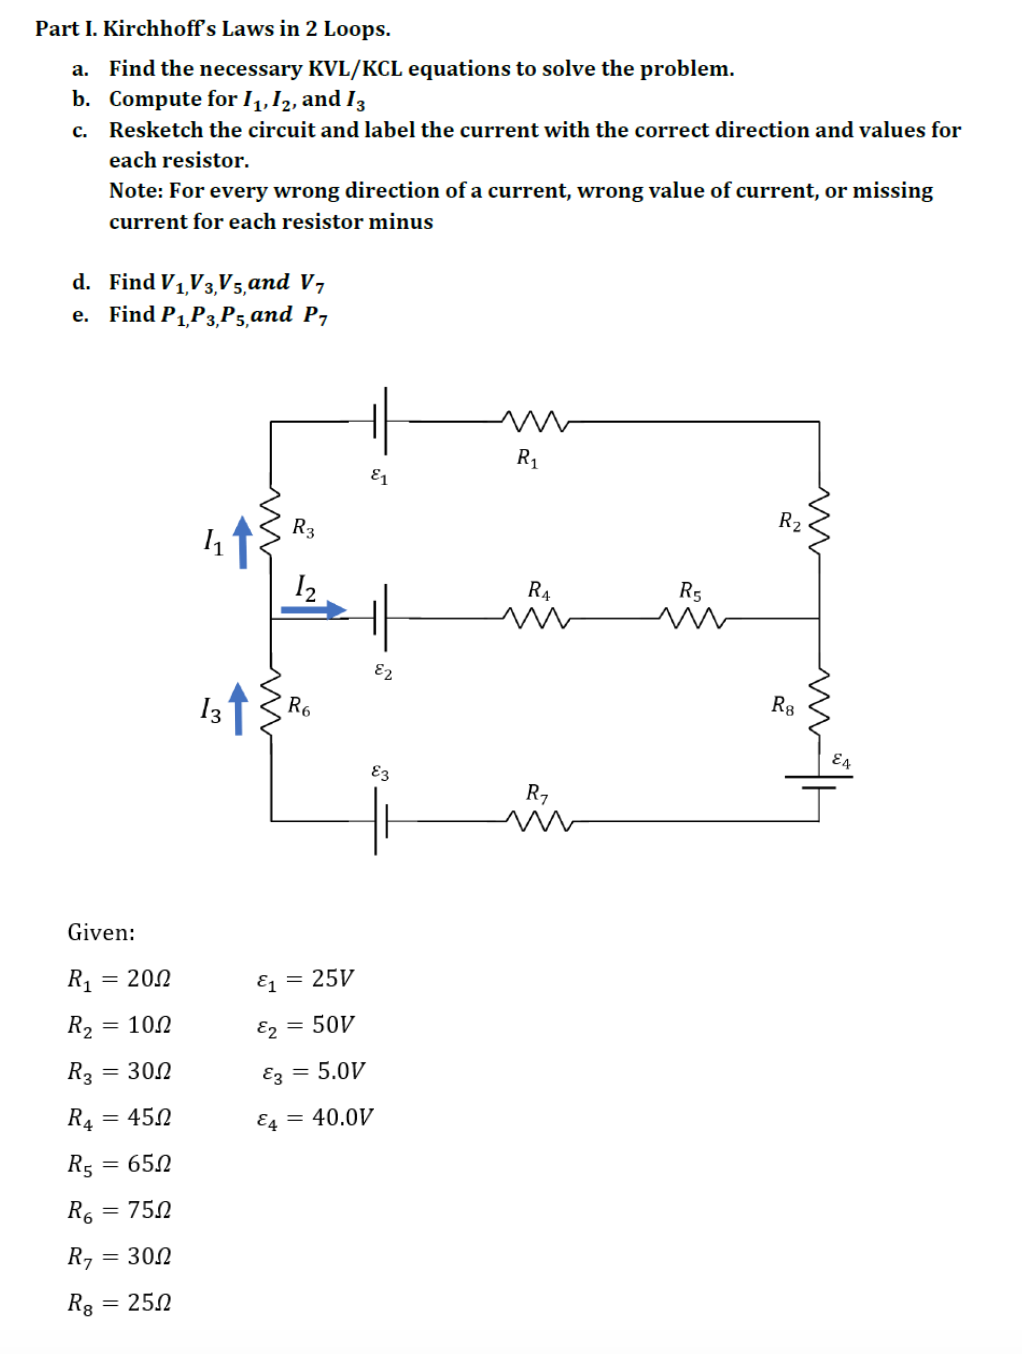 Part I. Kirchhoff's Laws in 2 Loops.
a. Find the necessary KVL/KCL equations to solve the problem.
b. Compute for I1,12, and I3
c. Resketch the circuit and label the current with the correct direction and values for
each resistor.
Note: For every wrong direction of a current, wrong value of current, or missing
current for each resistor minus
d. Find V1V3,V5,and V7
е. Find P1P3,Р5,аnd P-
R1
E1
R3
R2
I2
R4
R5
E2
13
R6
Rg
E4
E3
R7
Given:
R1
= 202
E = 25V
R2
= 102
E2 = 50V
R3 = 300
Ez = 5,0V
R4
= 452
E4 = 40.0V
R5
= 650
R6
= 750
R7
= 300
R8
= 250
